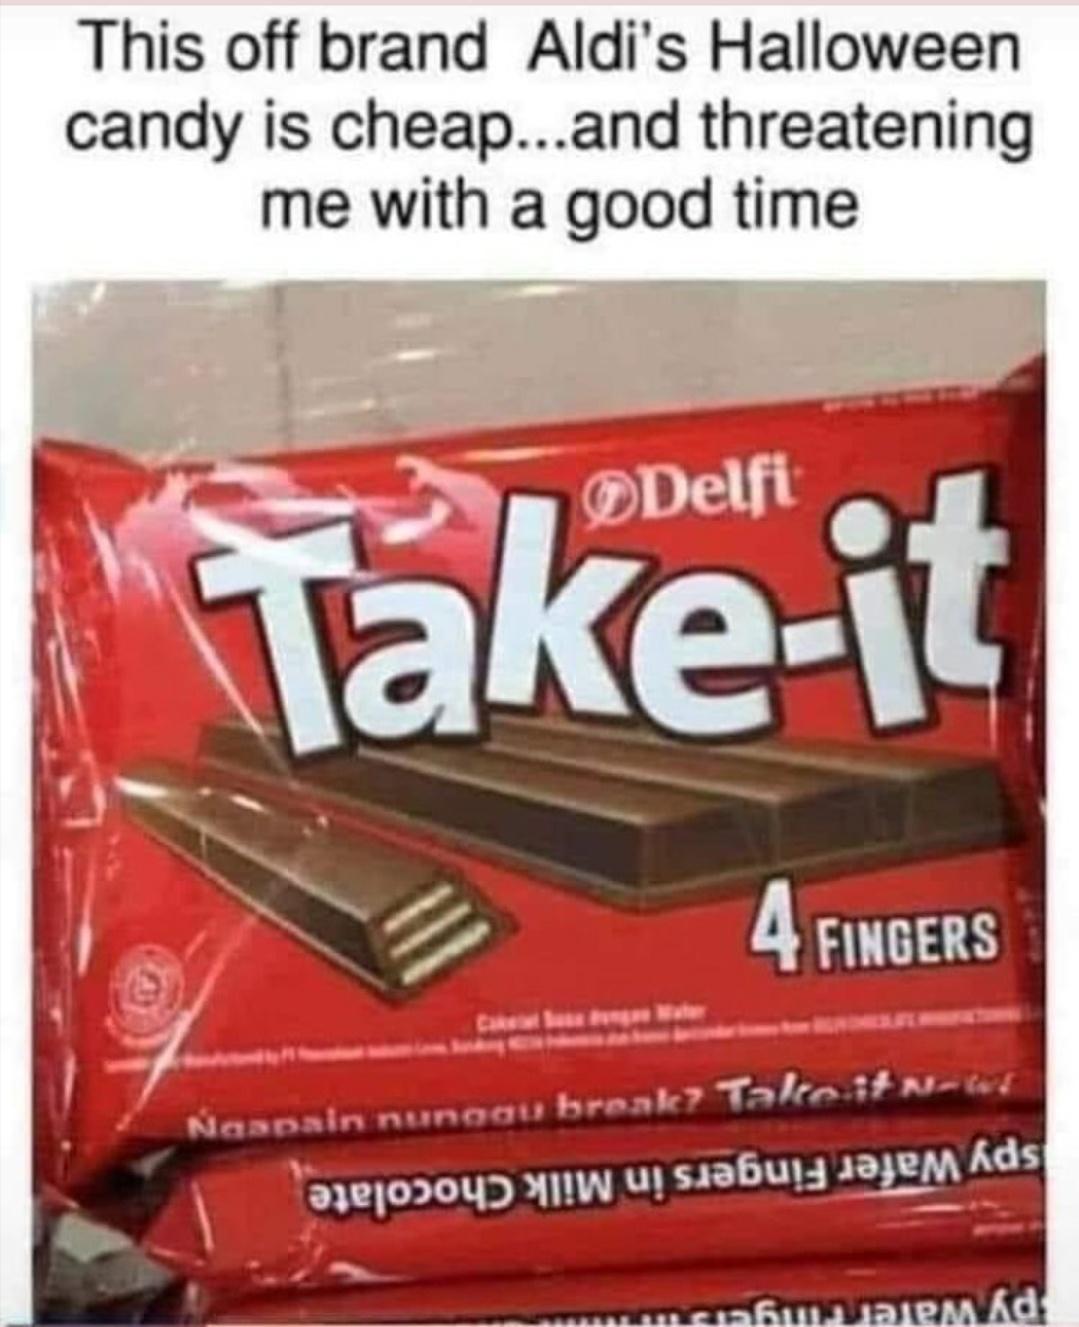 chocolate bar - This off brand Aldi's Halloween candy is cheap...and threatening me with a good time Delfi Takeit 4 Fingers Naapain nunggu break? Take it n w uy s Ads mamamatem ad